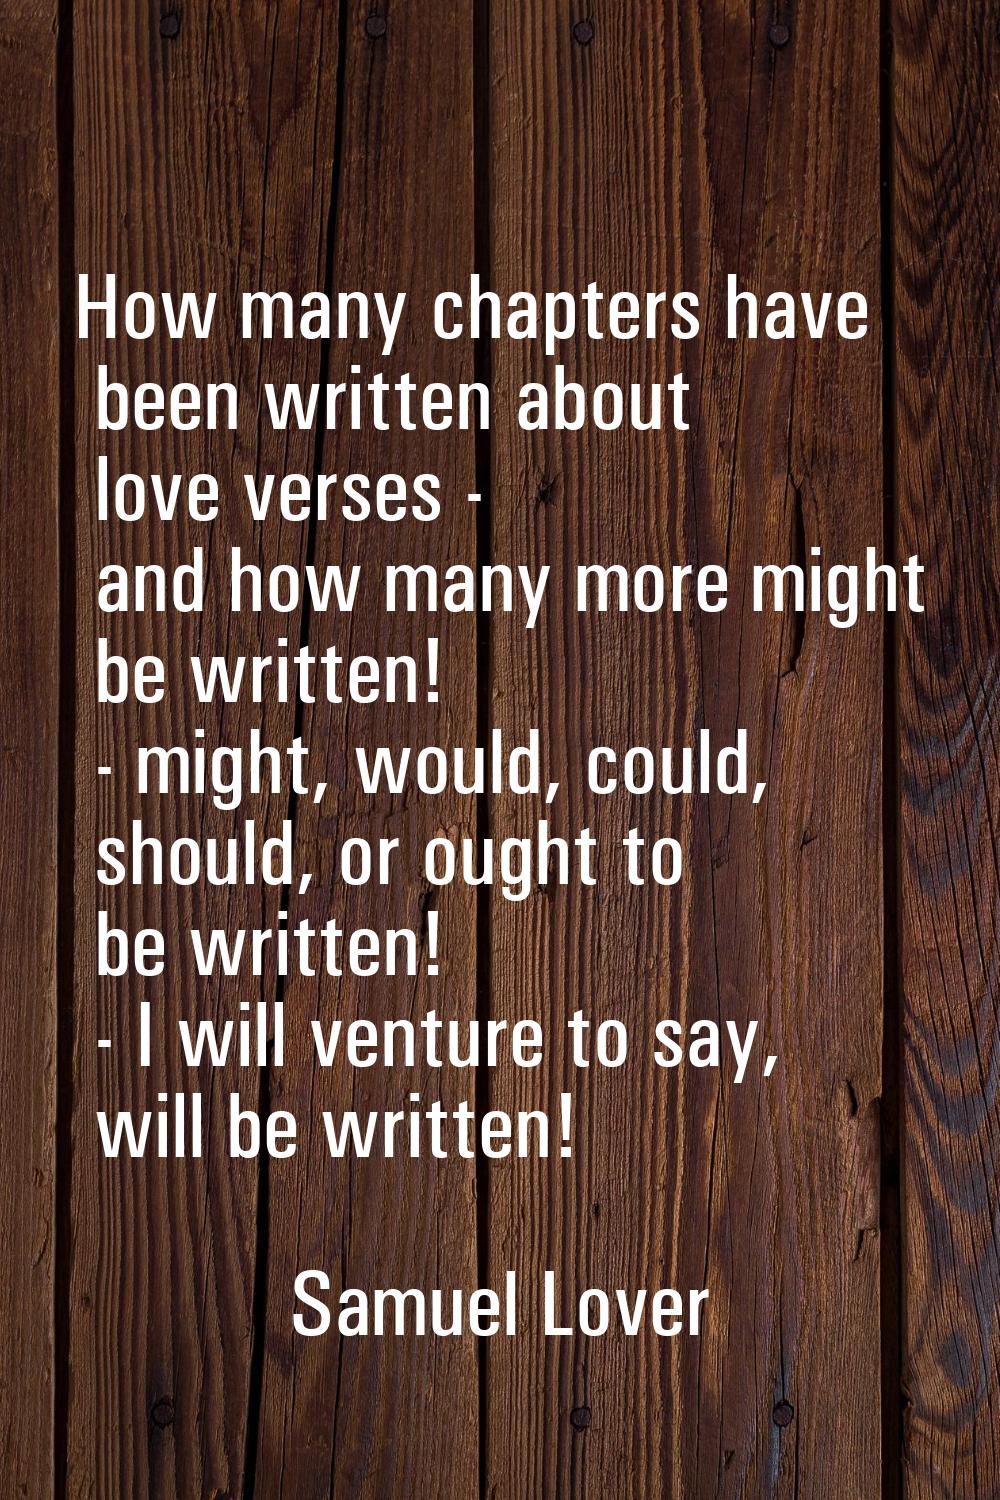 How many chapters have been written about love verses - and how many more might be written! - might